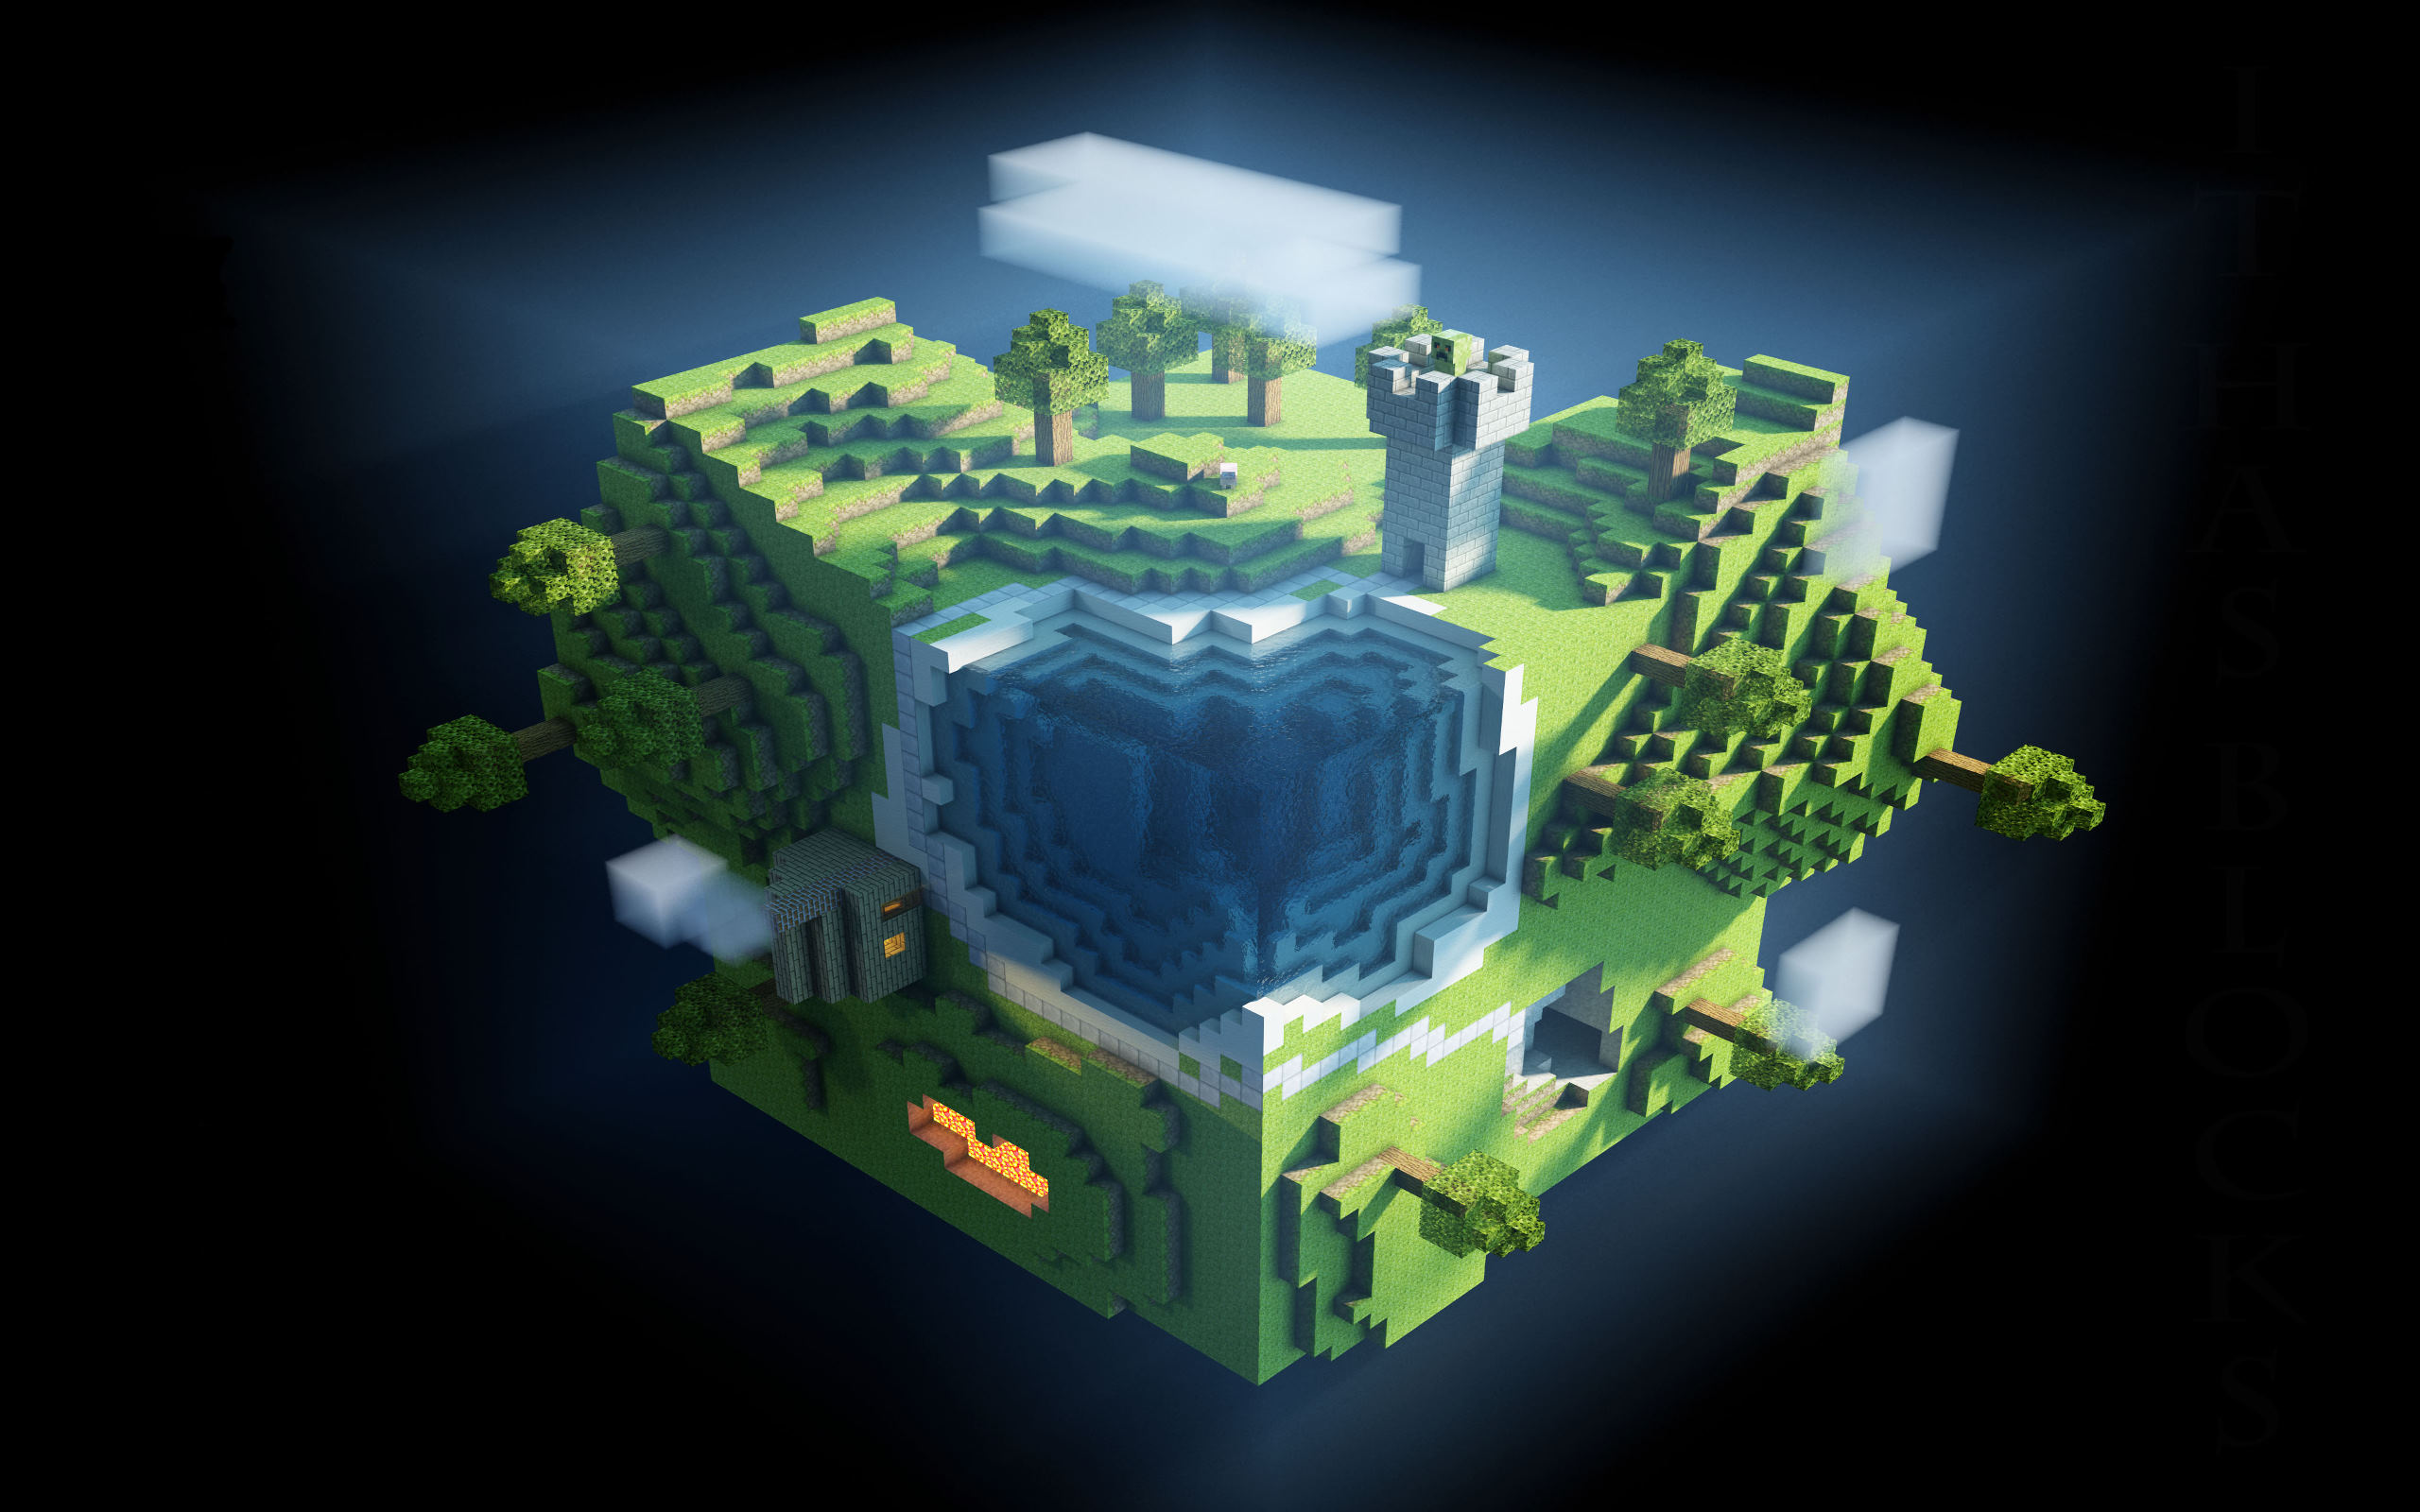 46+] Cool Minecraft Wallpapers for PC - WallpaperSafari